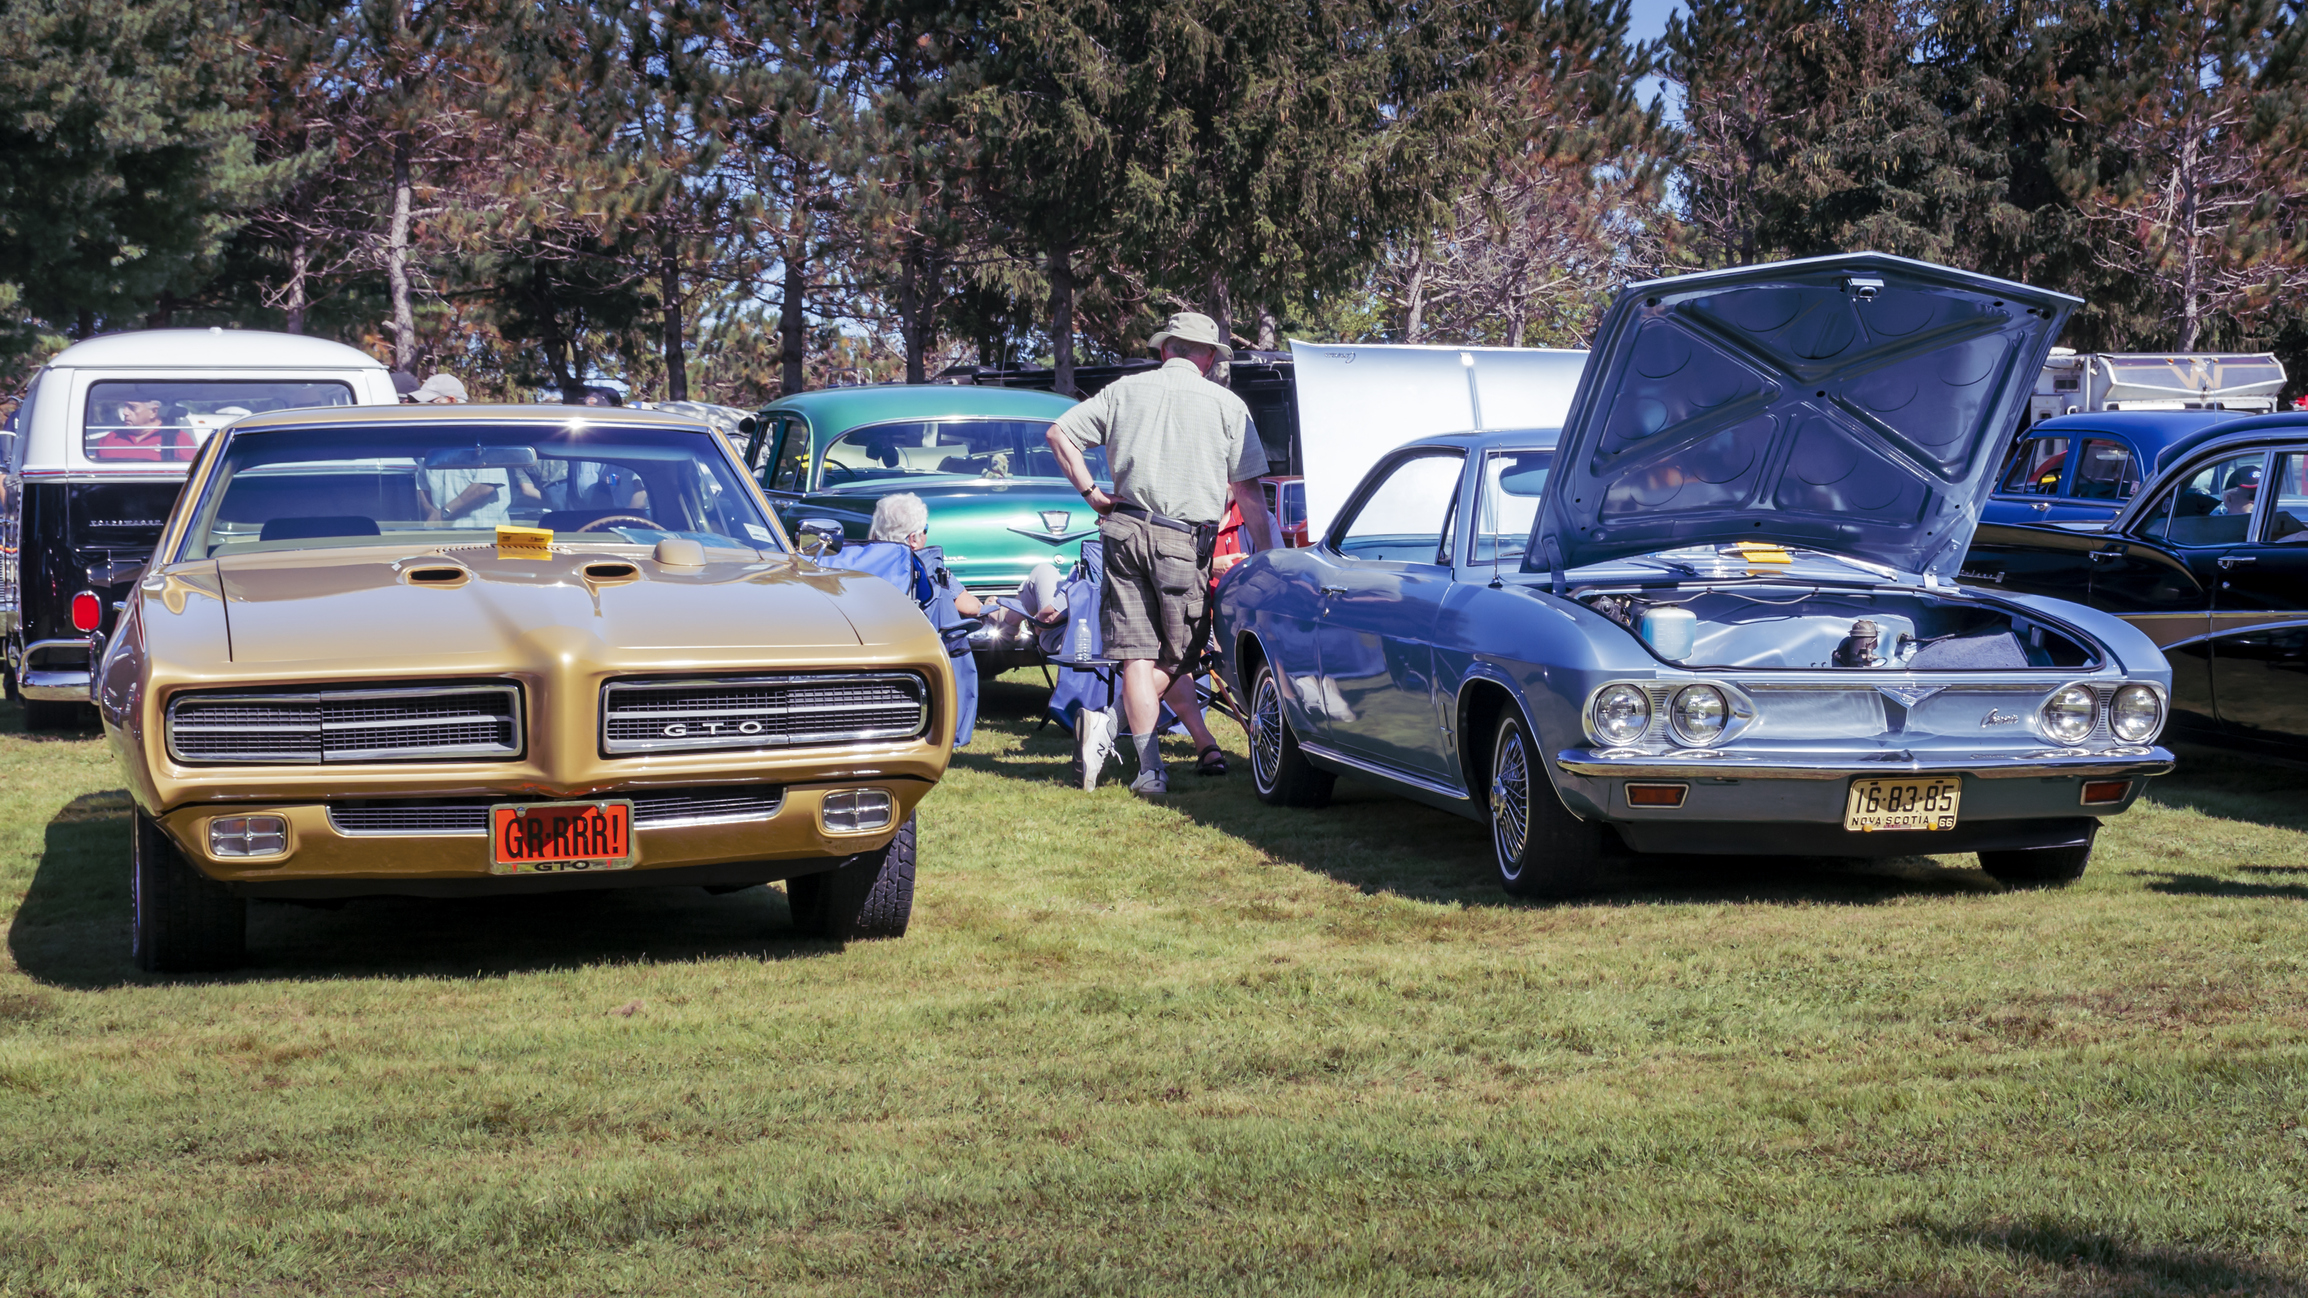 Hilden, Nova Scotia, Canada - September 21, 2019 : A pair of classic General Motors cars, 1969 Pontiac GTO & 1966 Chevrolet Corvair at Scotia Pine Show & Shine at Scotia Pine Campground. A man stands near the rear of the Corvair with hand on rear fender.